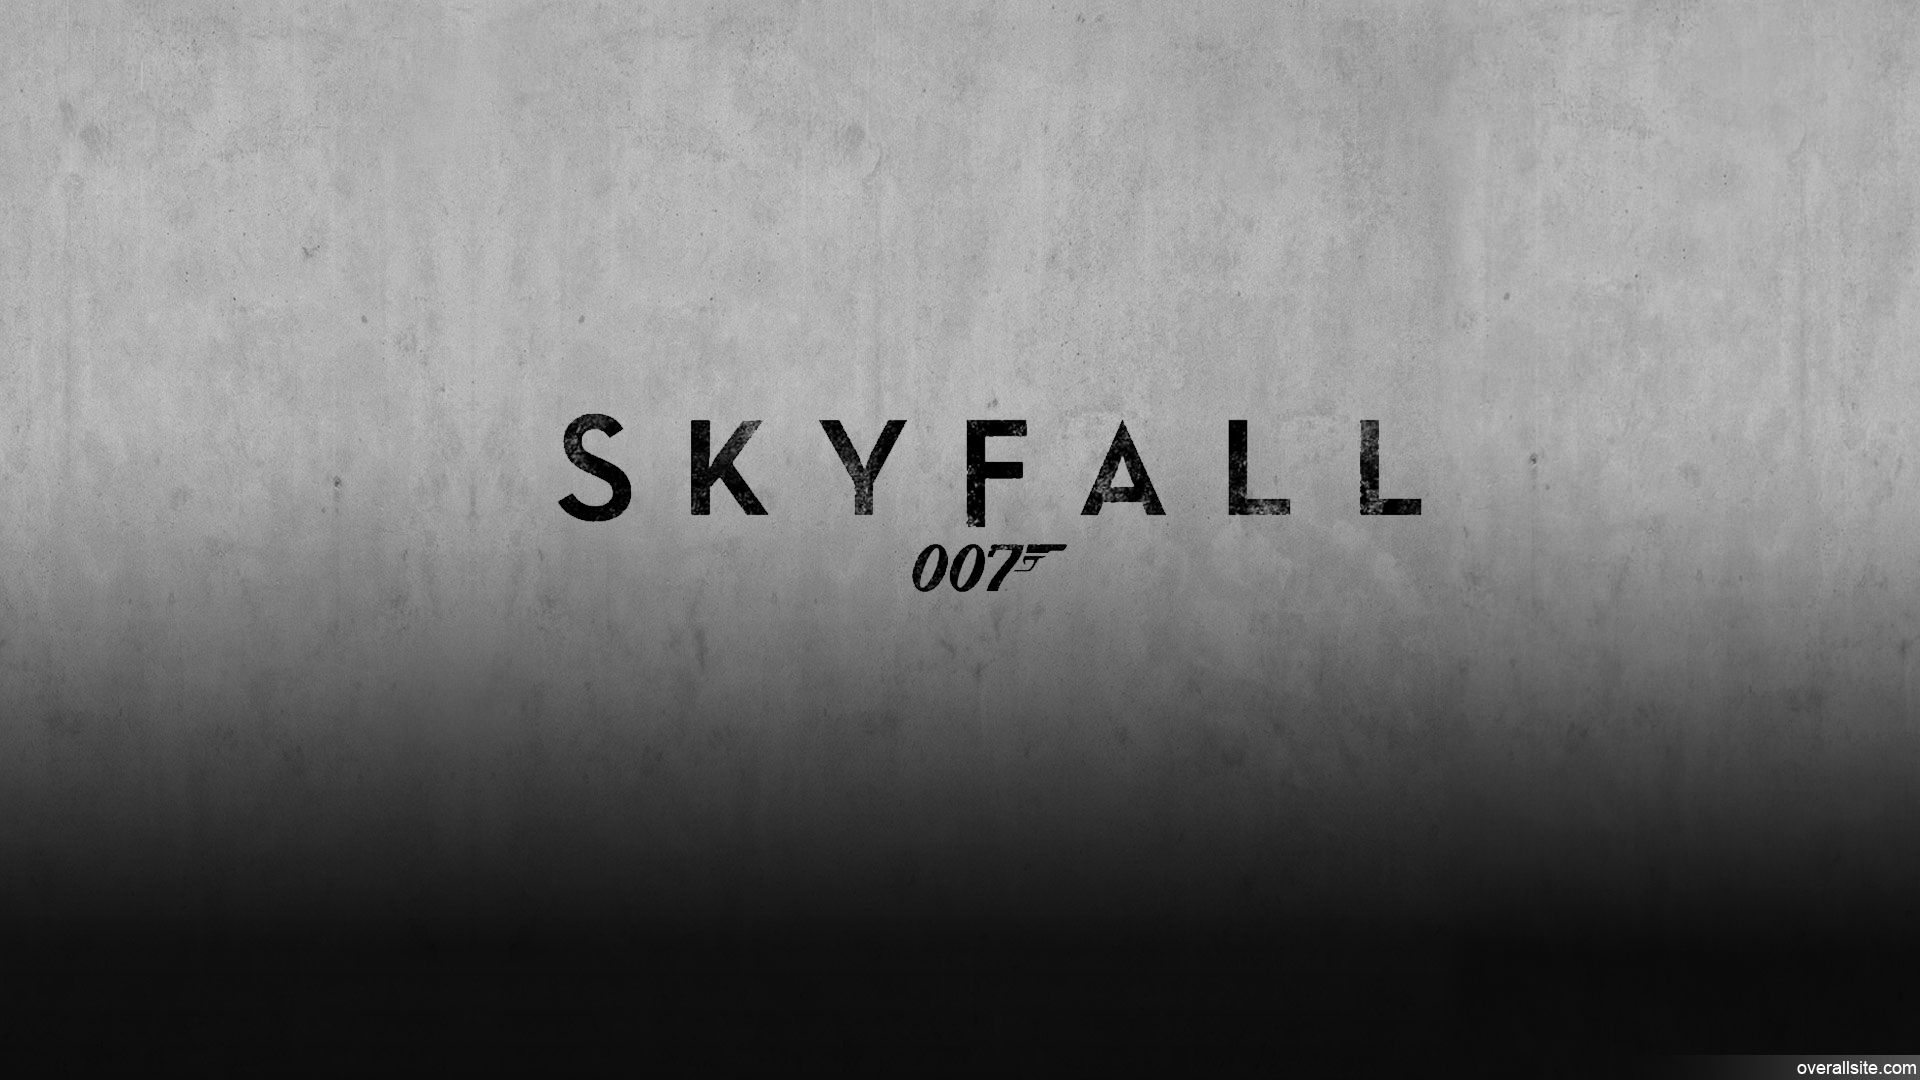 7 Awesome Skyfall Wallpapers, Trailer And Reviews